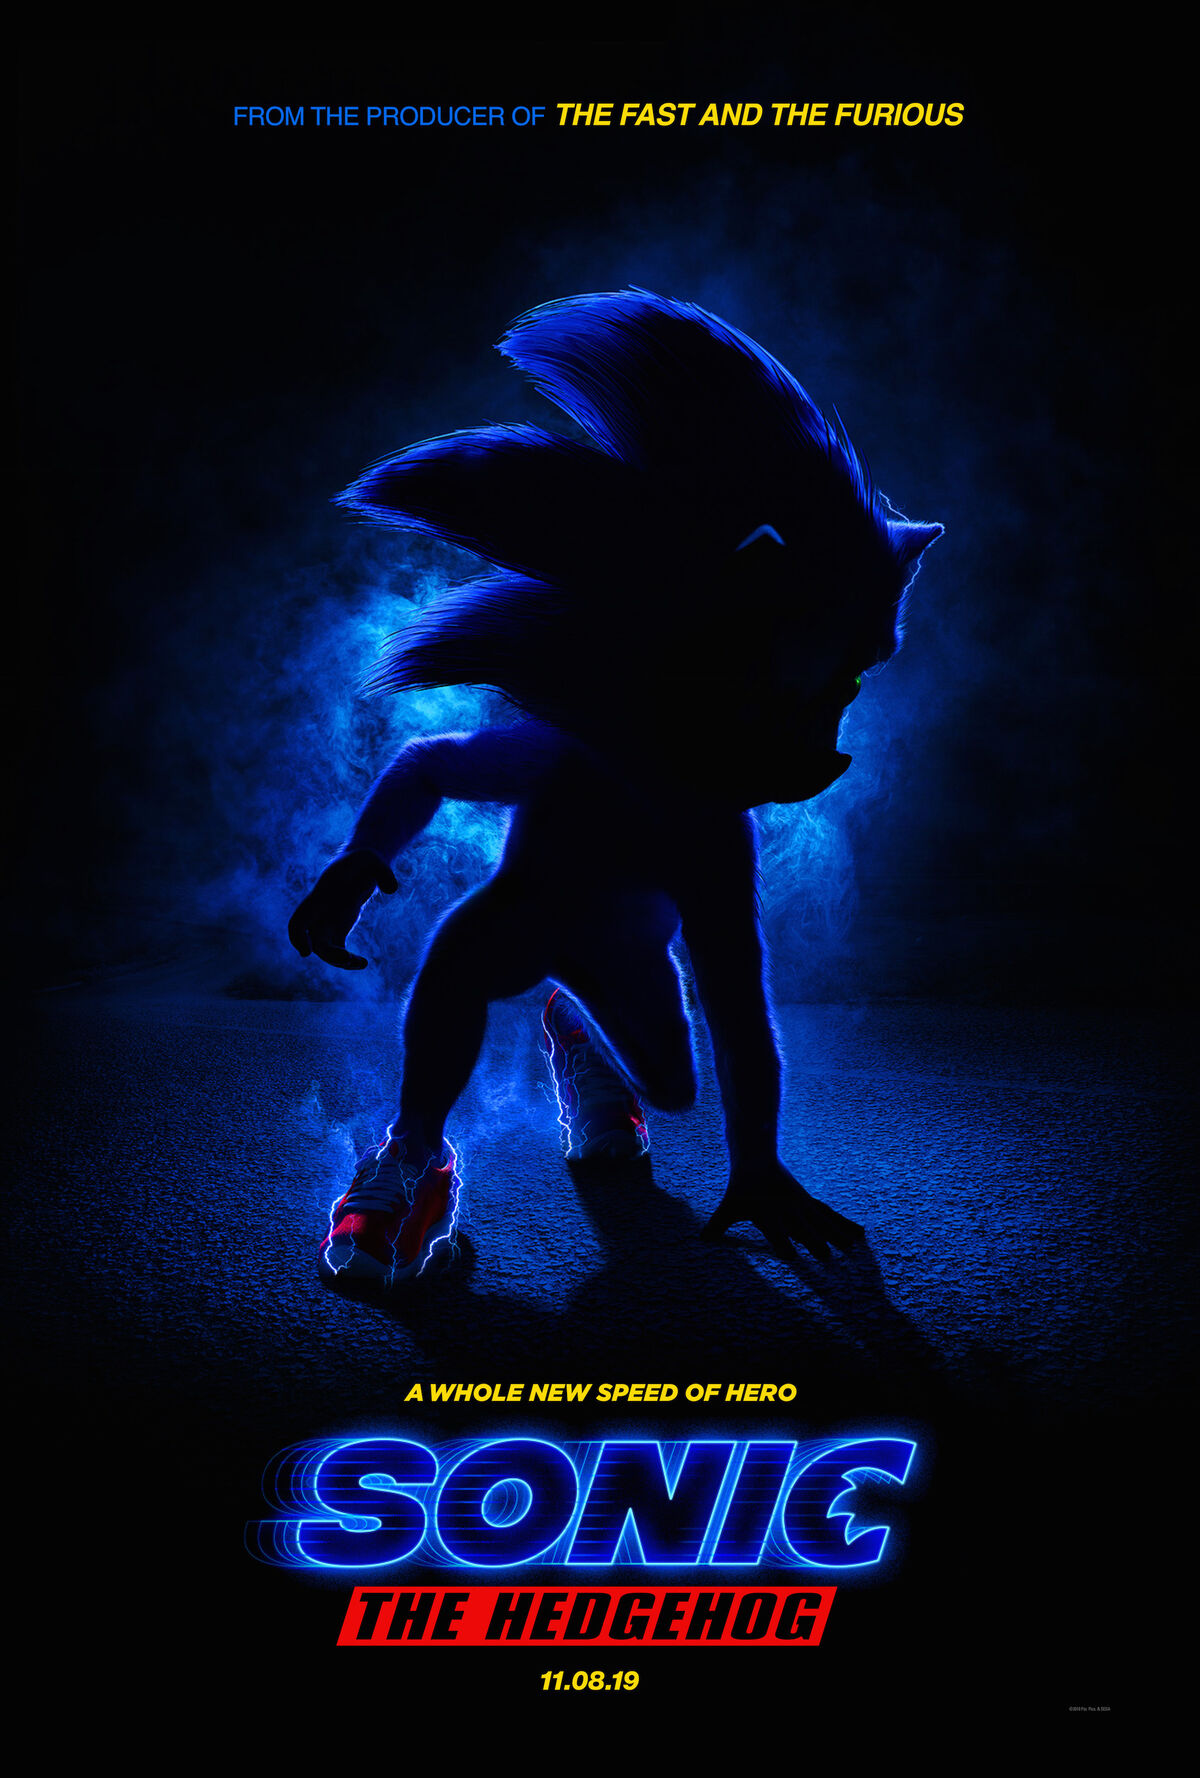 Sonic The Hedgehog (original version), Cancelled Movies. Wiki